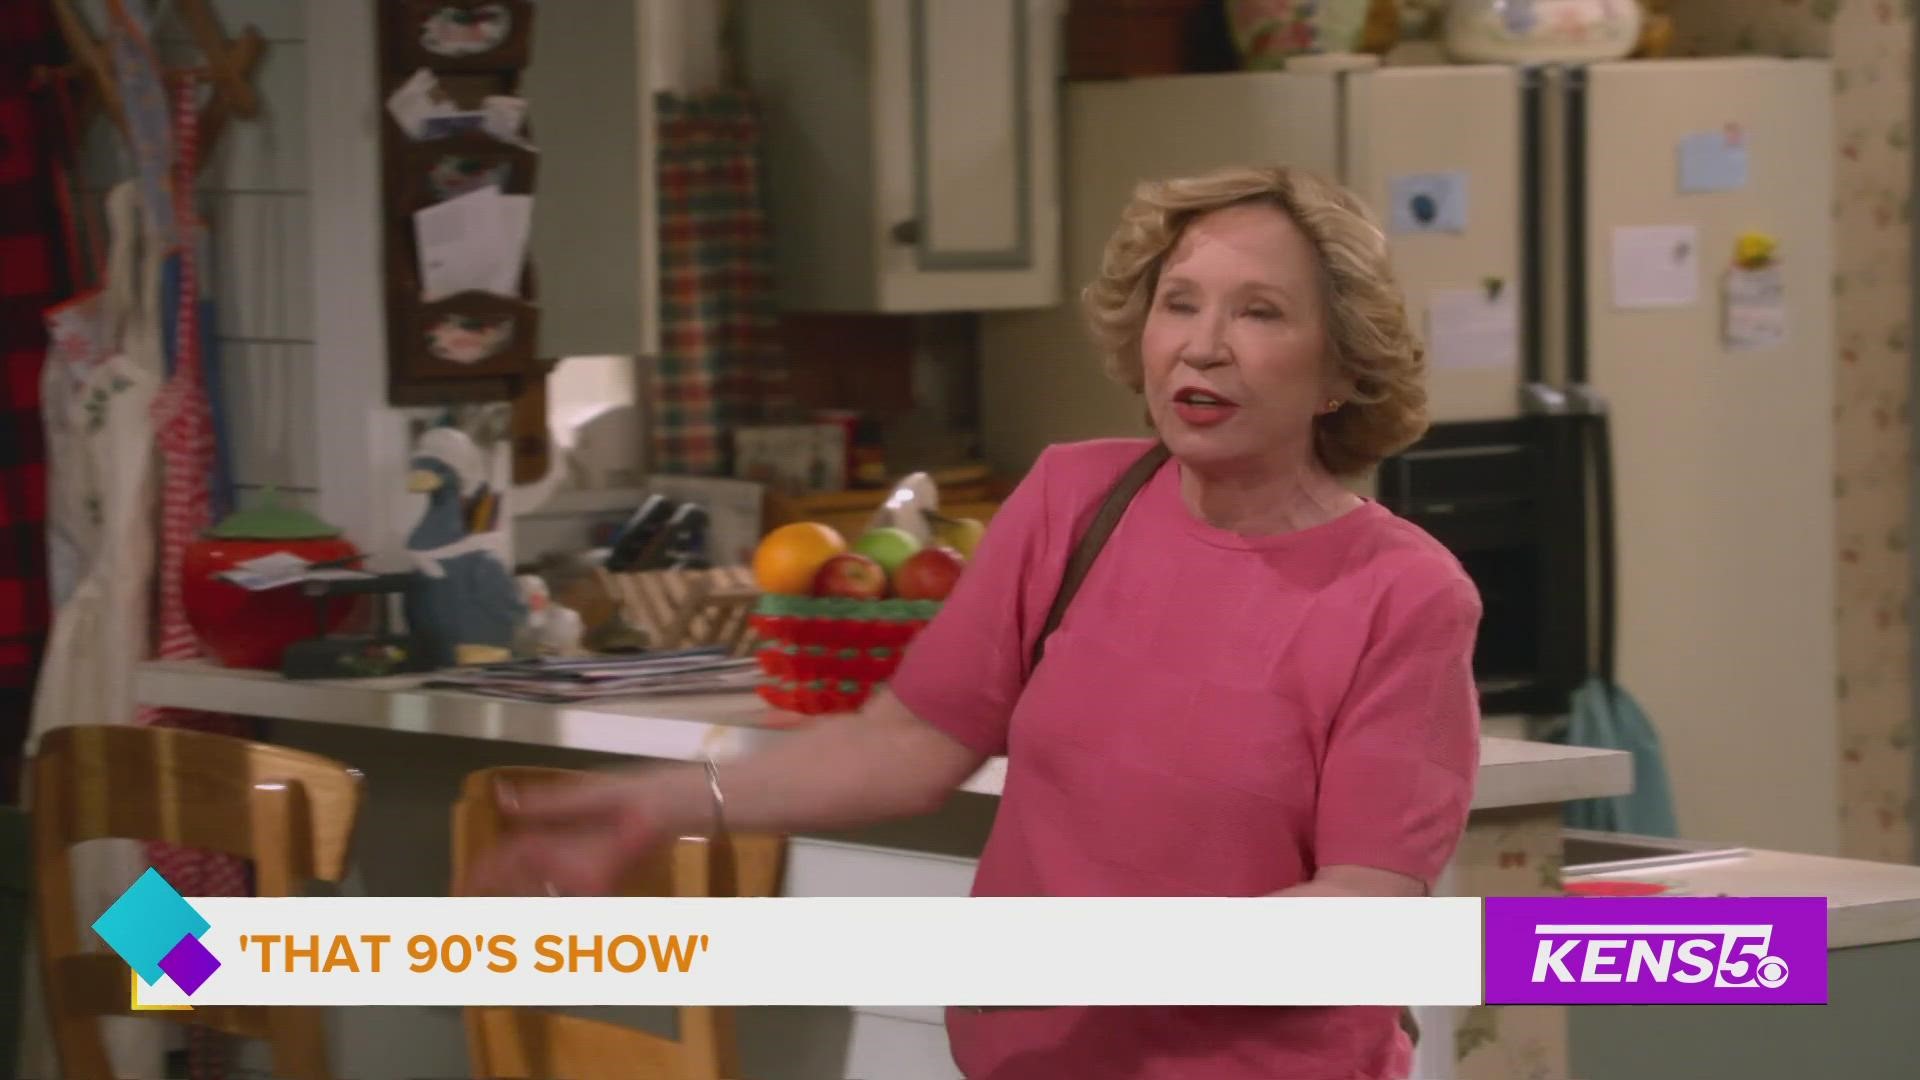 That 70's Show actress, Debra Jo Rupp, speaks with Paul about her new Netflix series , That 90's Show.